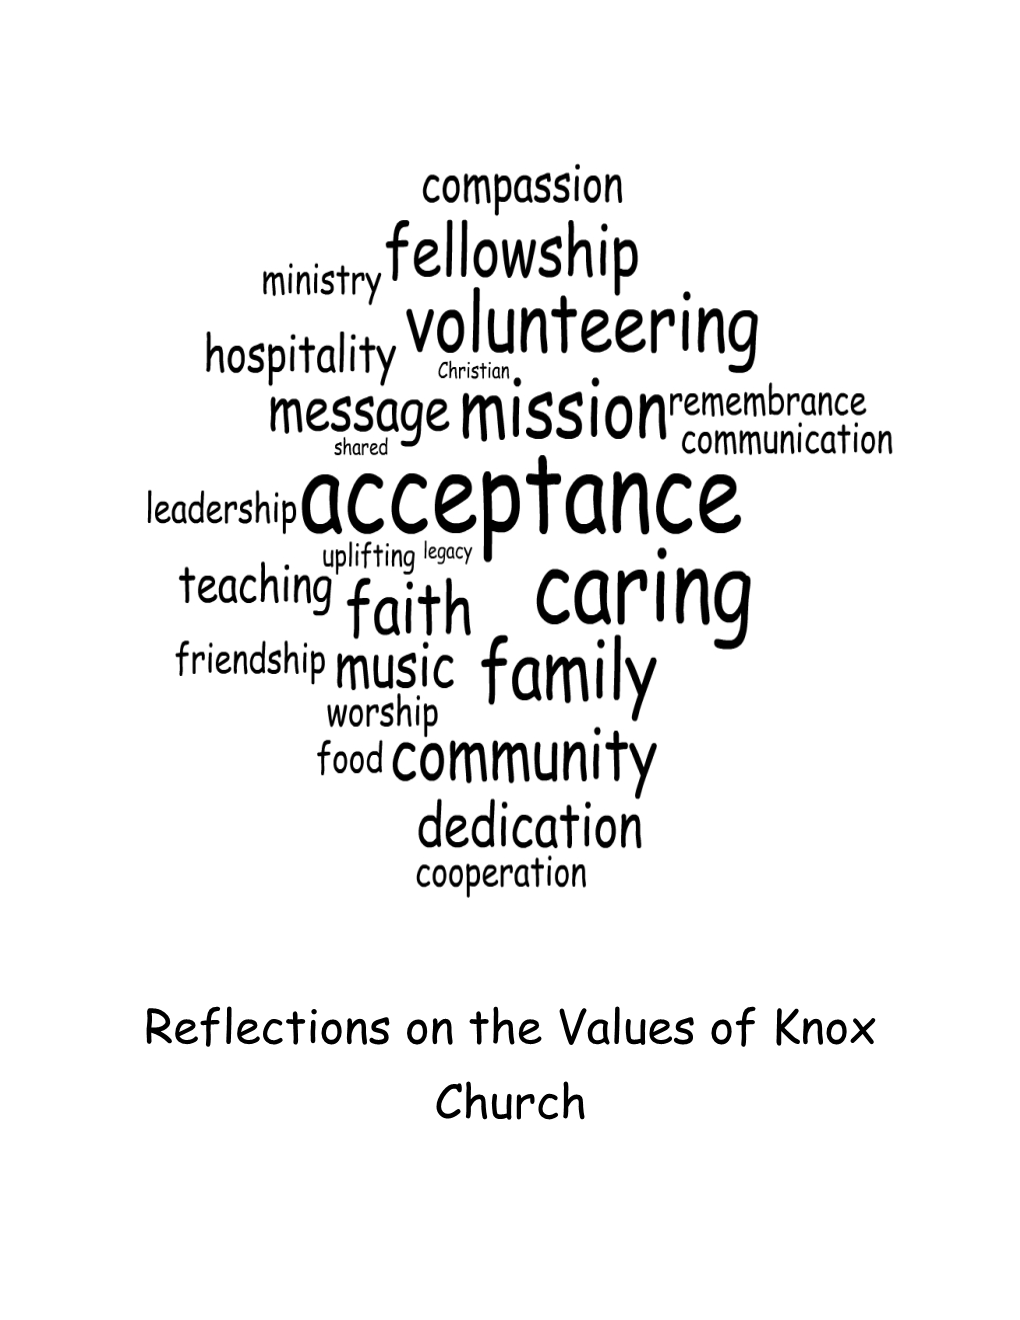 Reflections on the Values of Knox Church